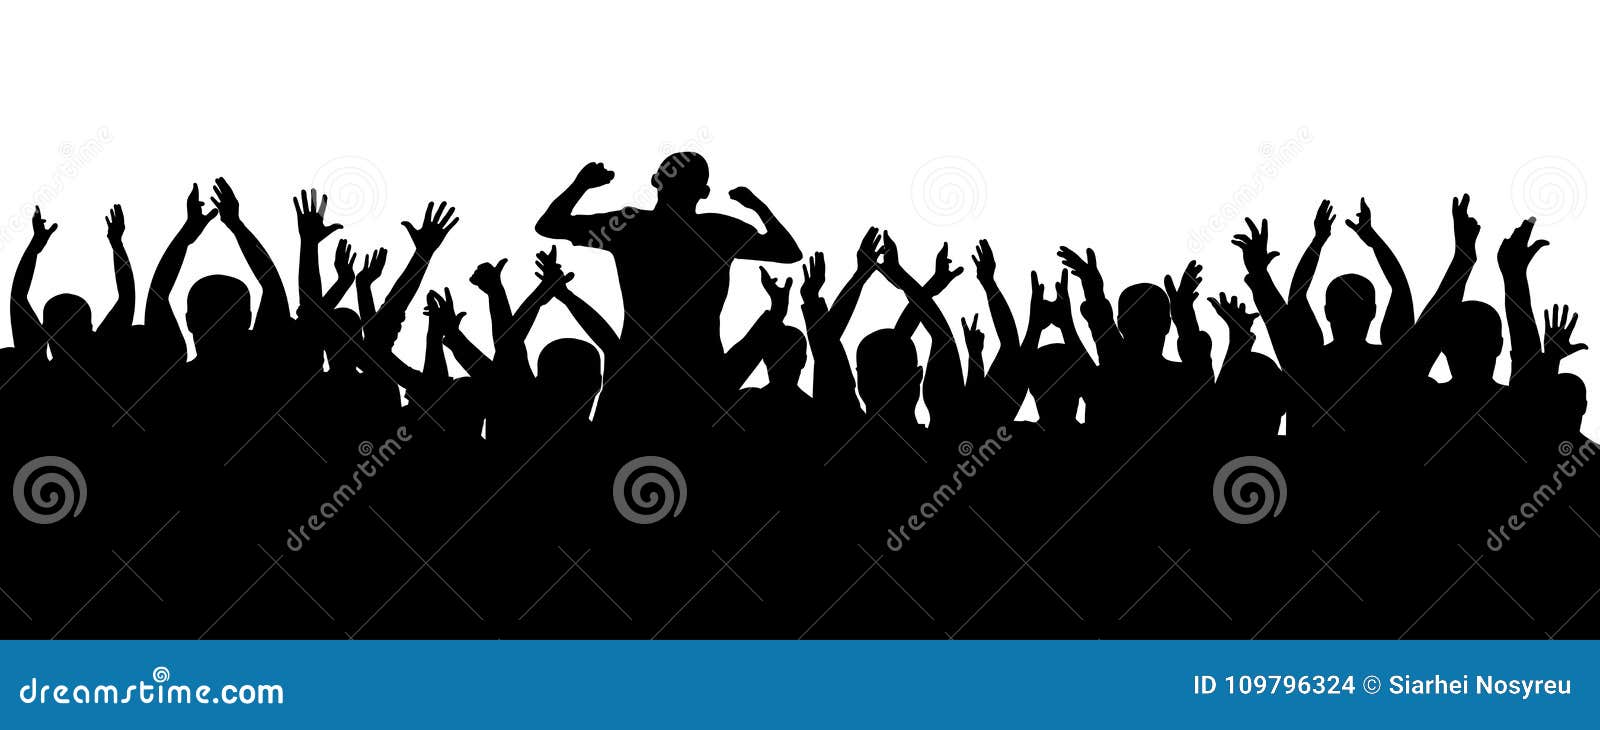 crowd of jubilant people silhouette. sports fans. people applaud. concert, party, disco.